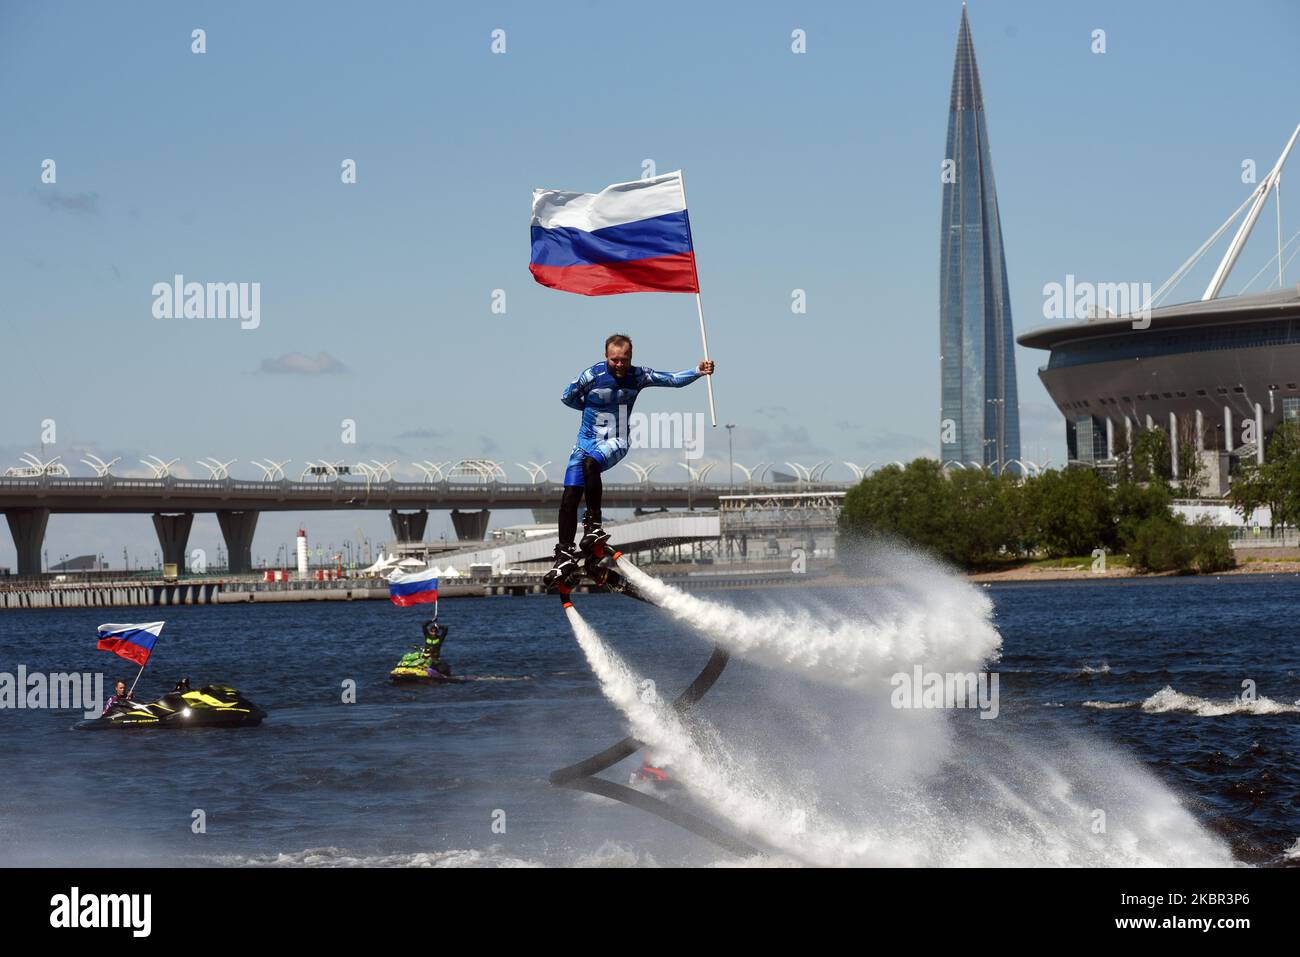 A member of the Russian hydroflight team performs holding the Russian national flag during the Day of Russia celebration on June 12, 2020 in St. Petersburg, Russia. (Photo by Sergey Nikolaev/NurPhoto) Stock Photo